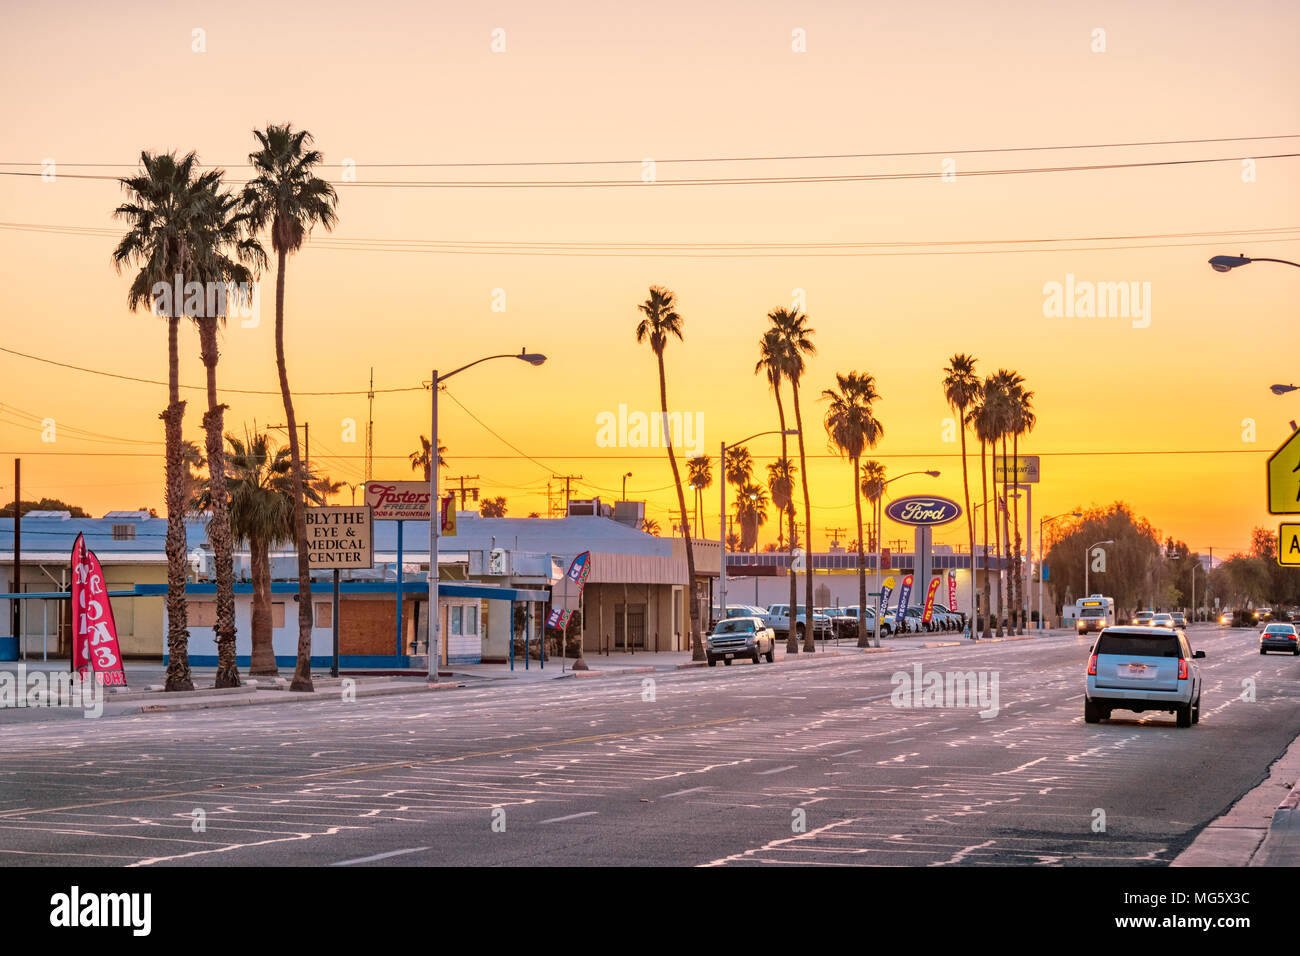 Hobsonway, a main street with palm trees in Blythe, Riverside County, California USA at sunset Stock Photo